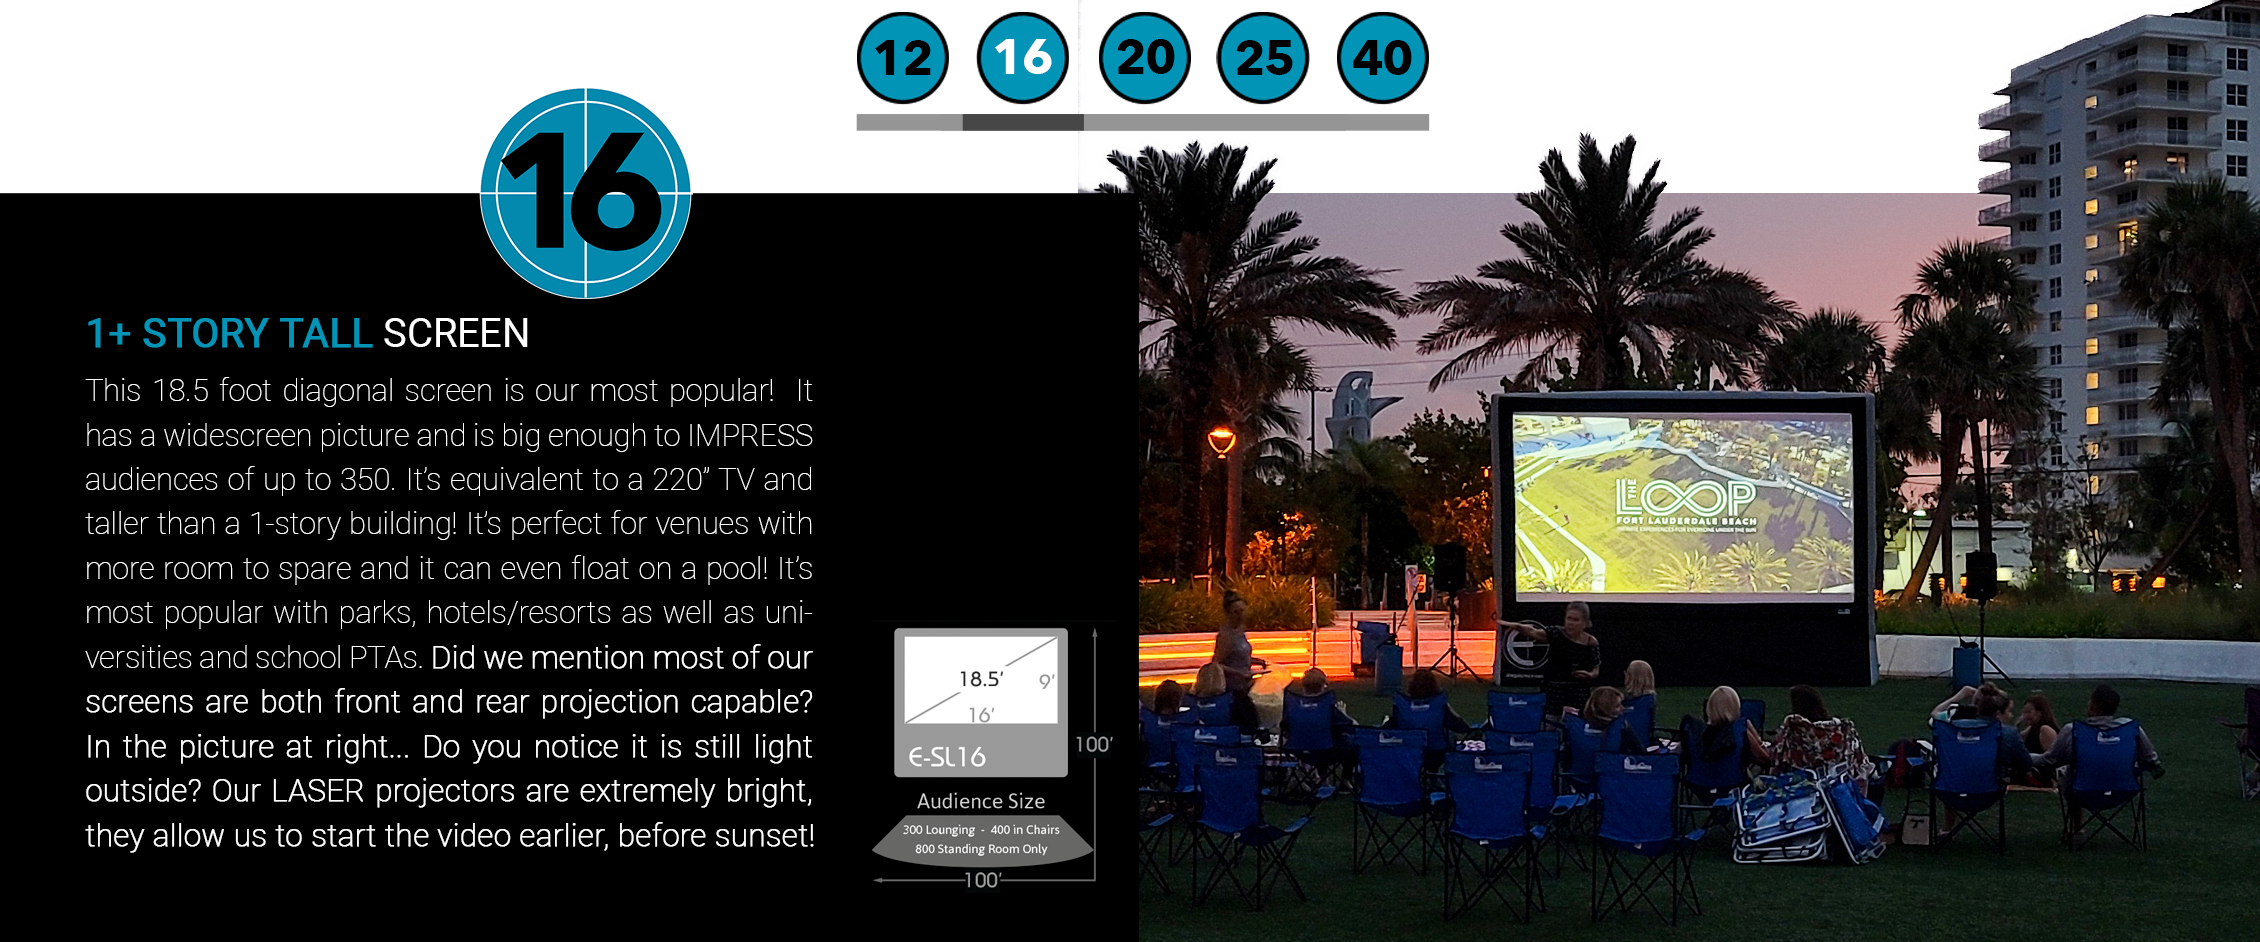 This 18.5 foot diagonal screen is our most popular! It has a widescreen picture and is big enough to IMPRESS audiences of up to 350. It’s equivalent to a 220” TV and taller than a 1-story building! It’s perfect for venues with more room to spare and it can even float on a pool! It’s most popular with parks, hotels/resorts as well as universities and school PTAs. Did we mention most of our screens are both front and rear projection capable? In the picture at right... Do you notice it is still light outside? Our LASER projectors are extremely bright, they allow us to start the video earlier, before sunset!